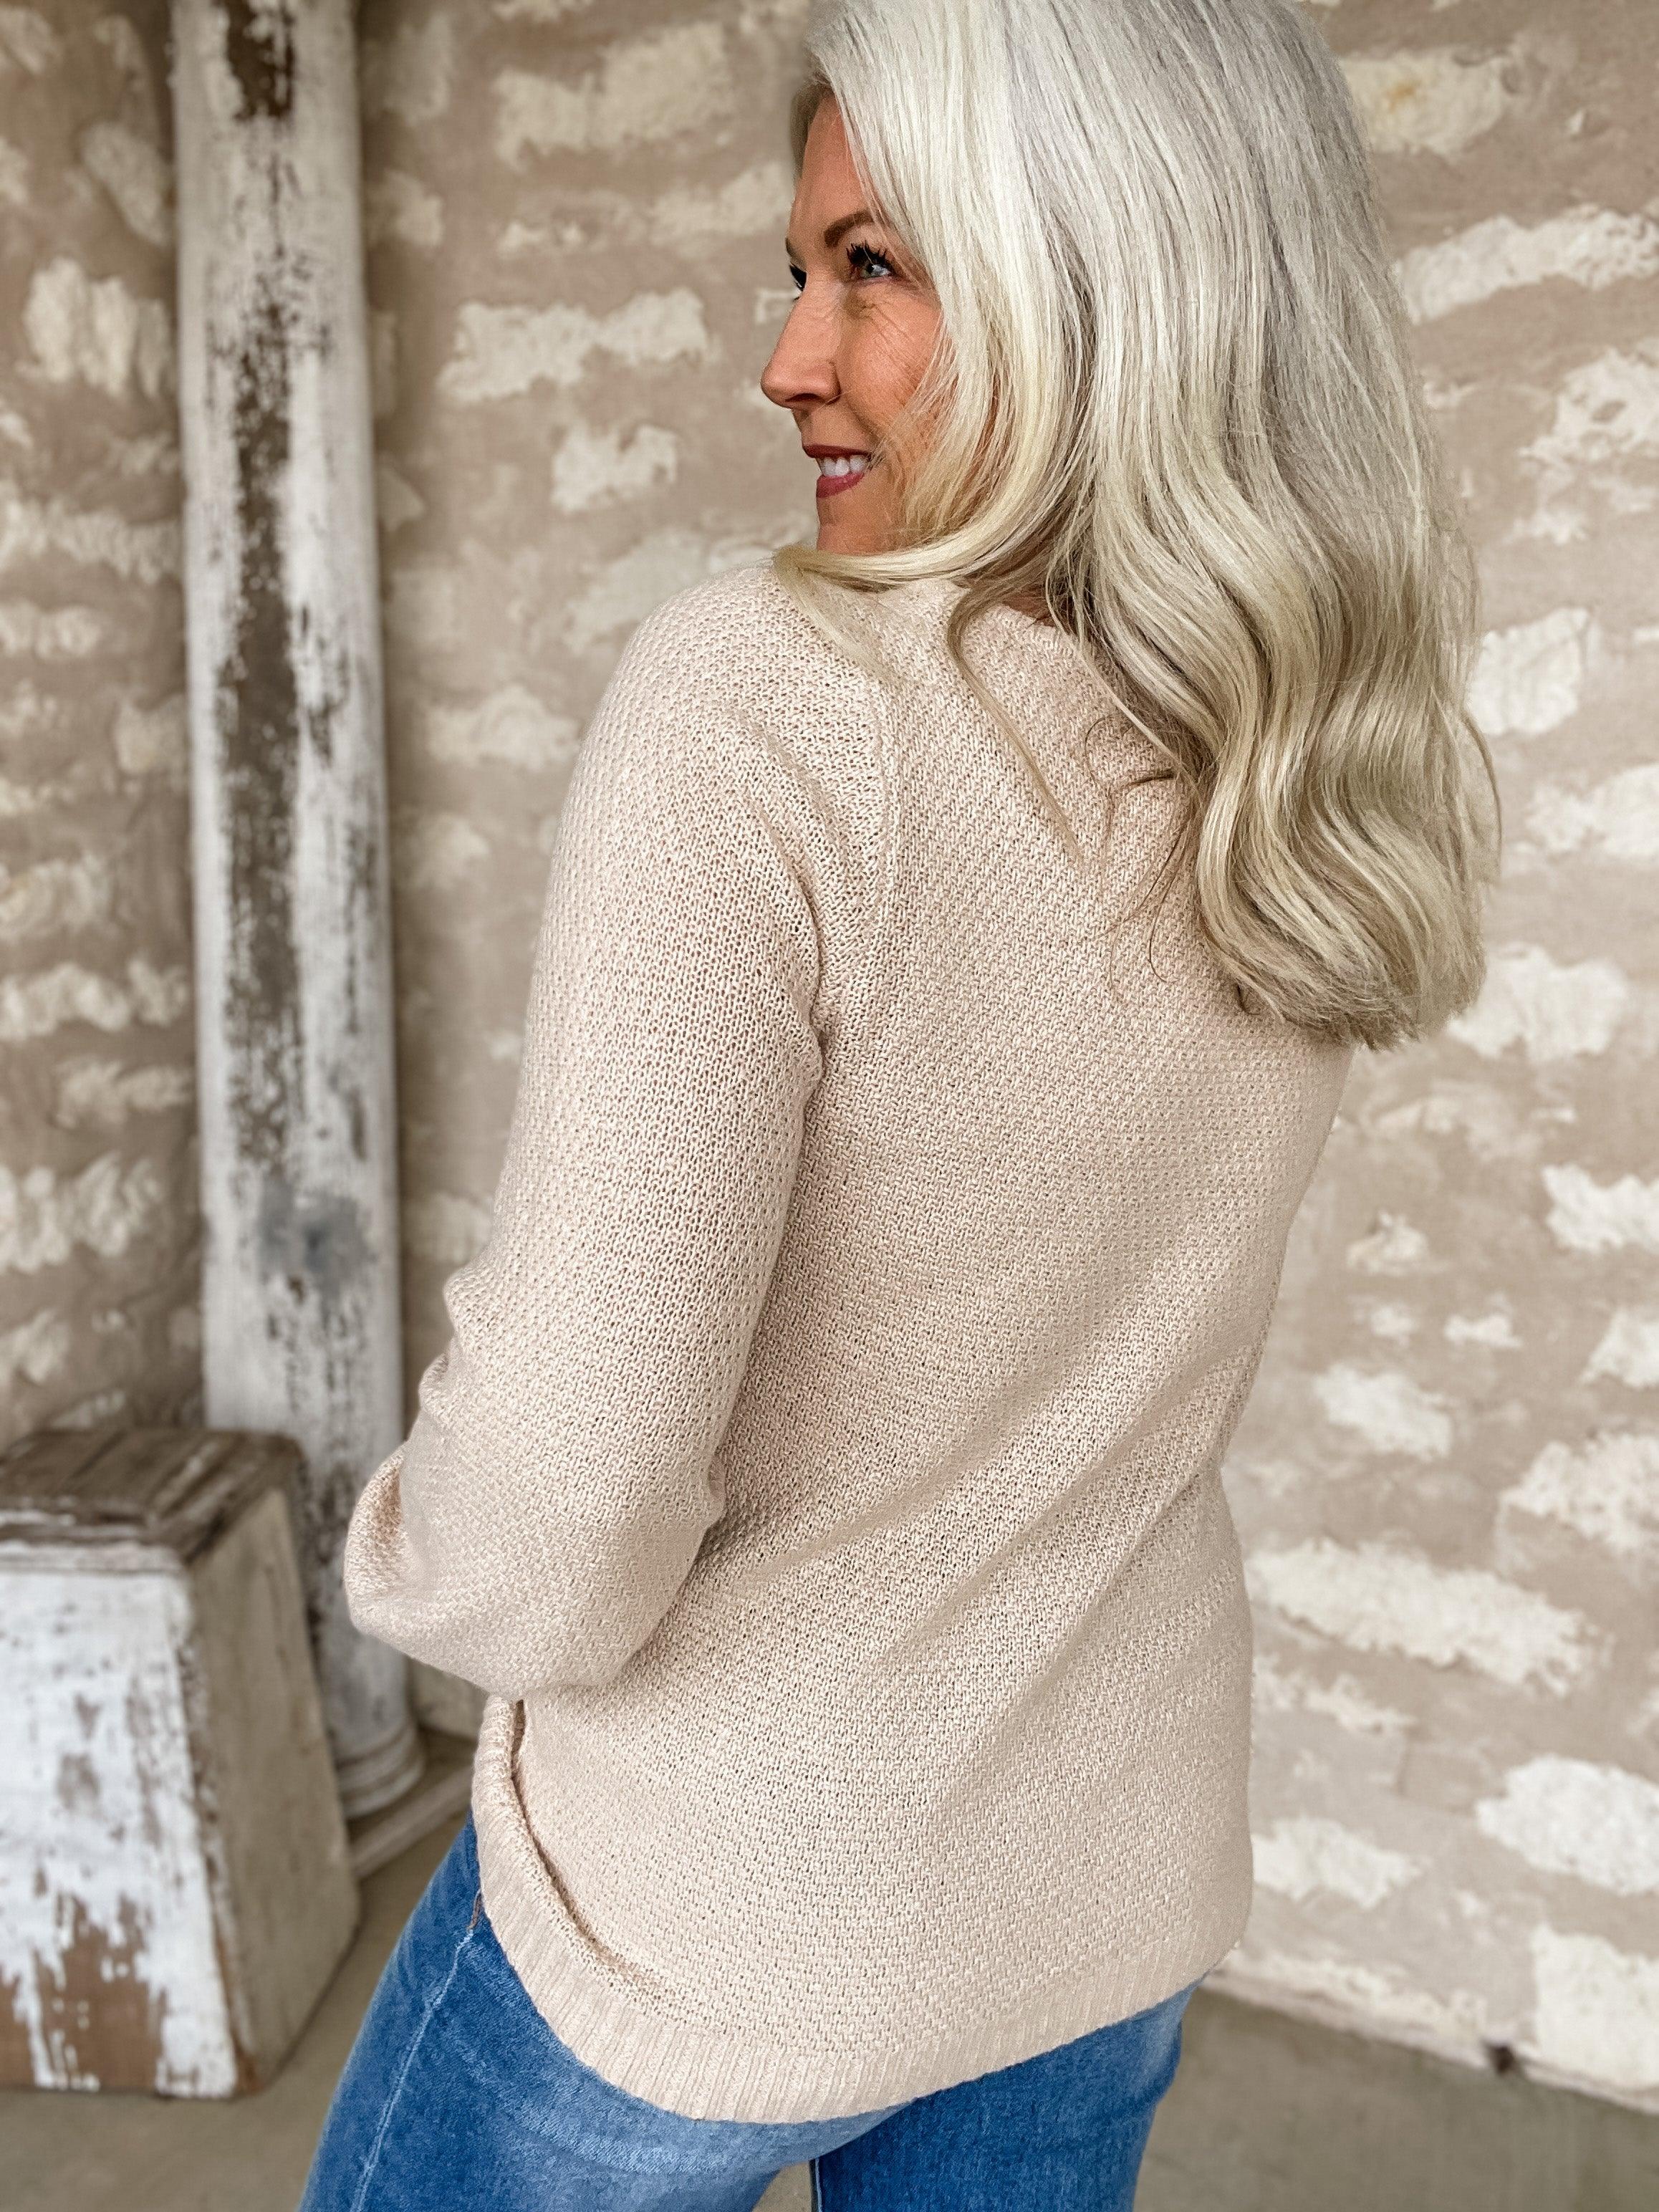 Sandy Shores Waffle Pullover